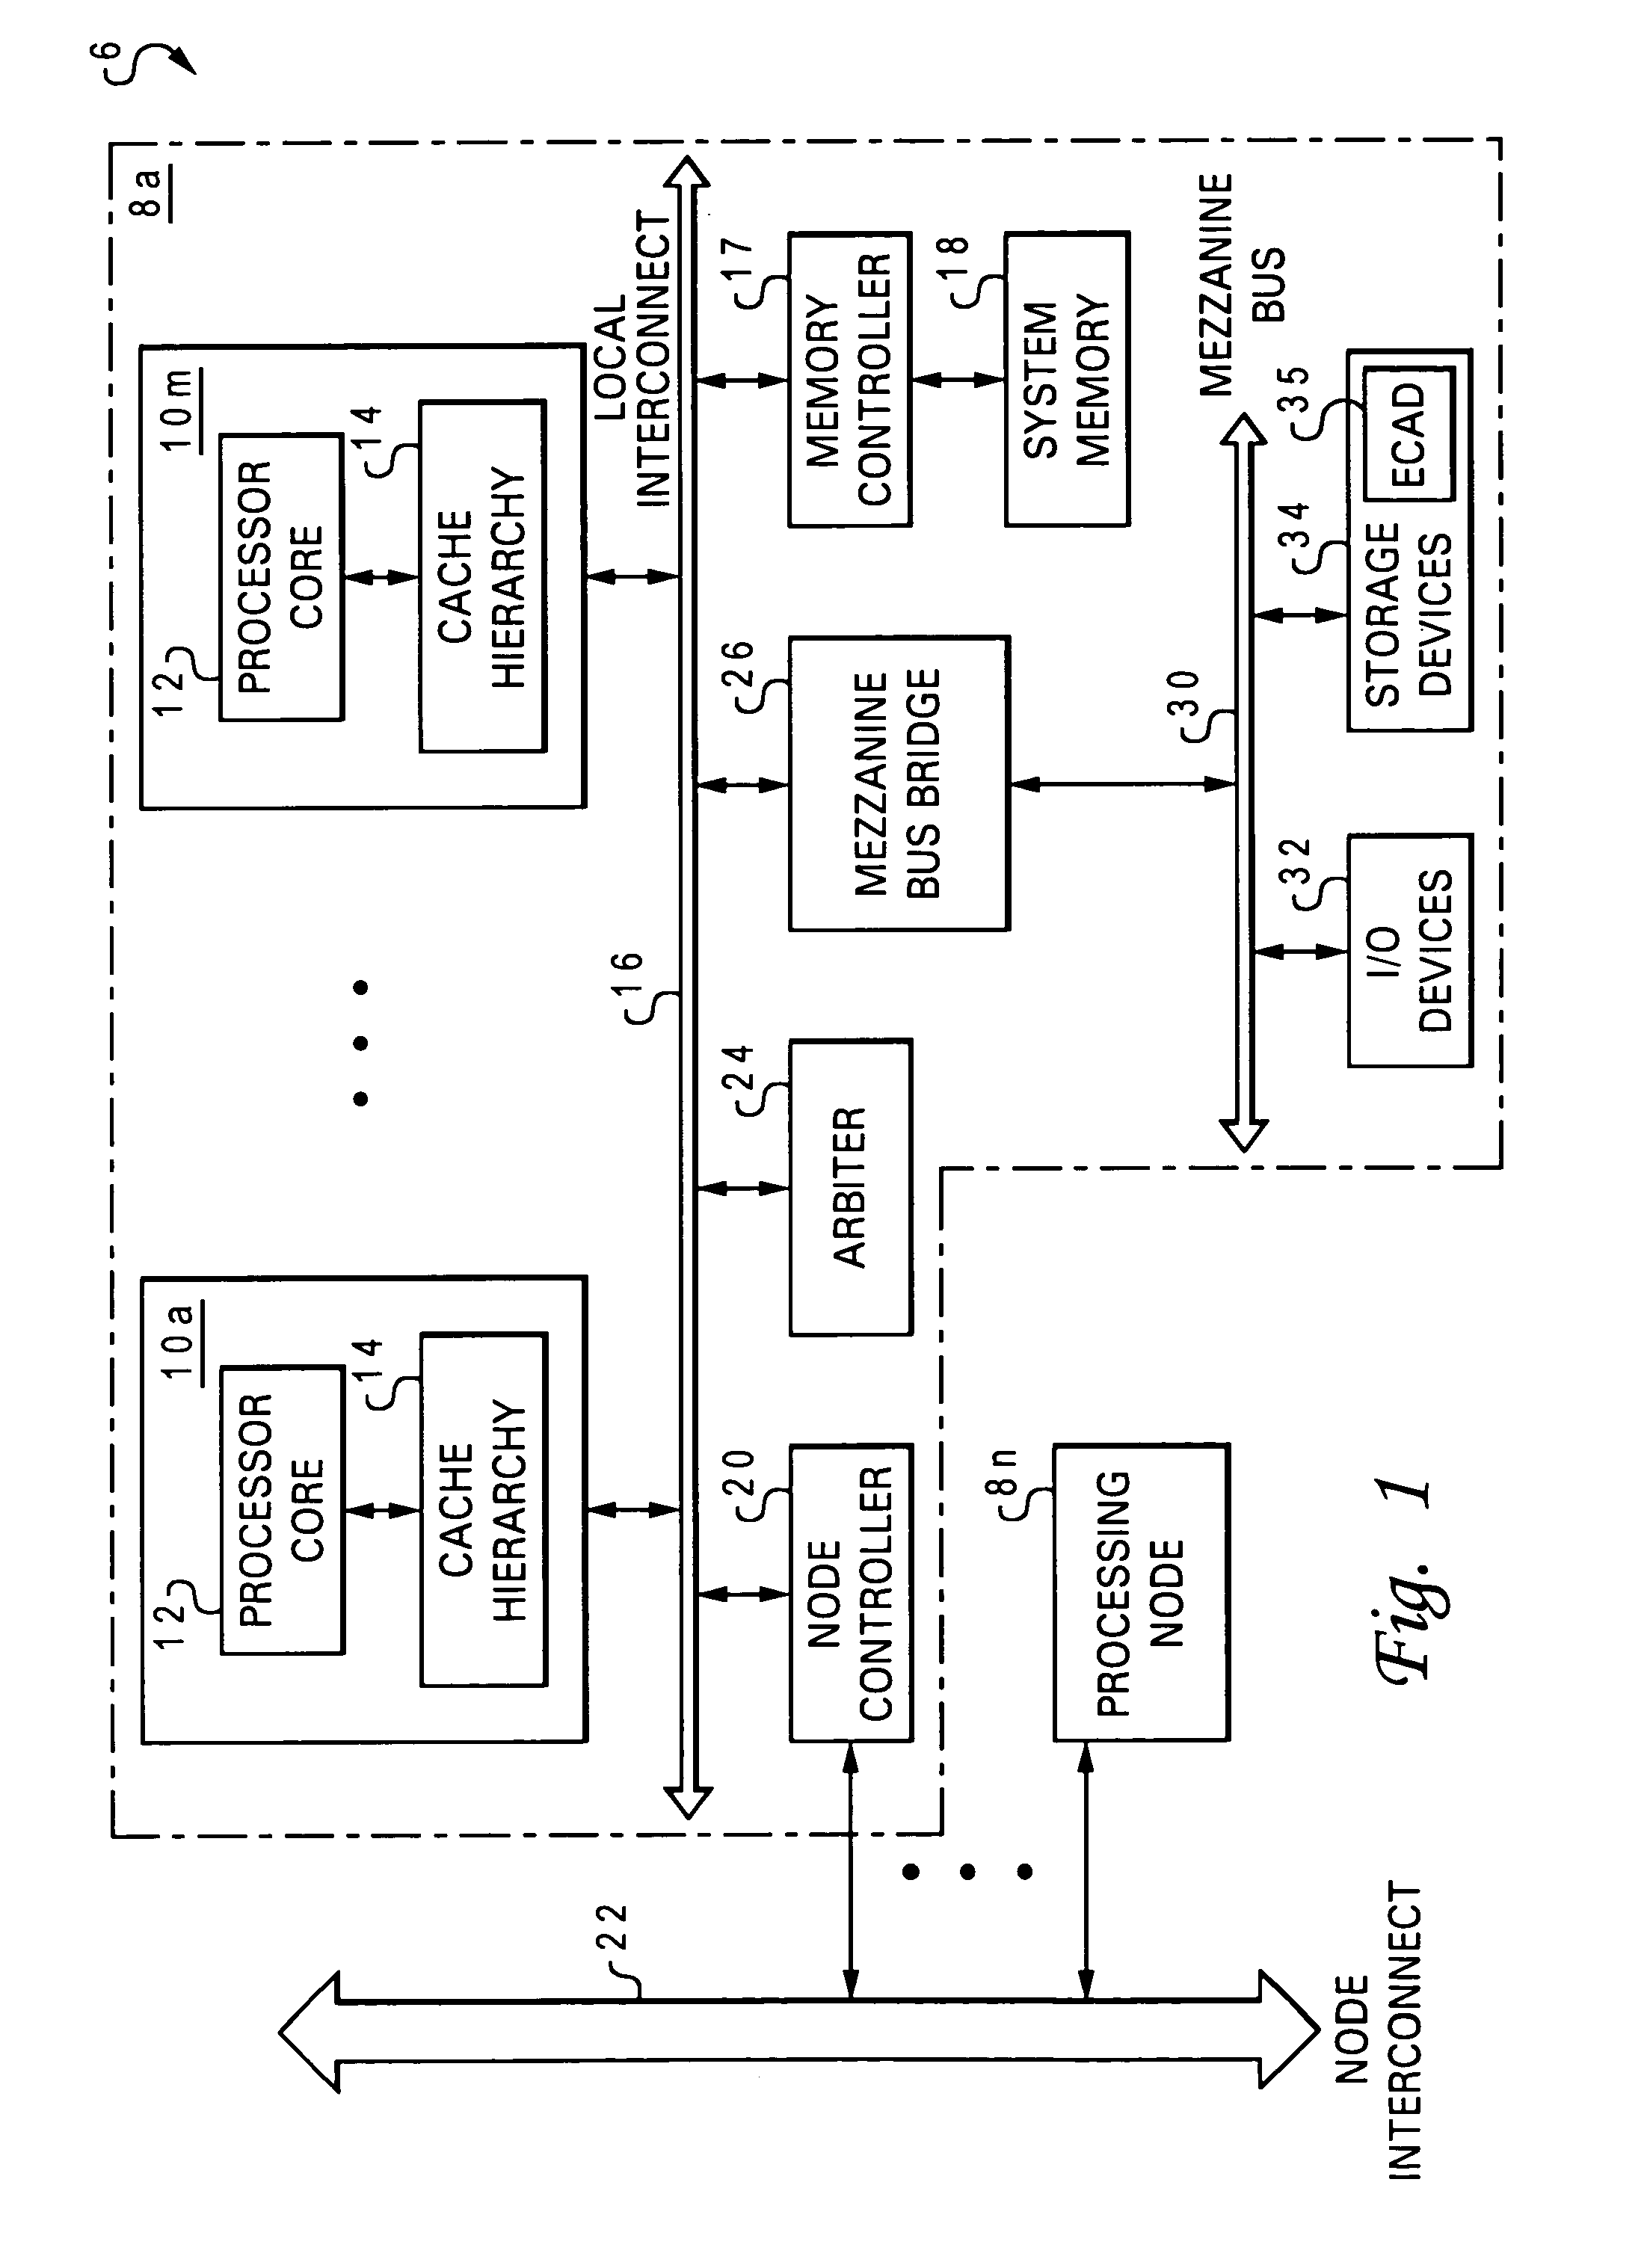 Method, system and program product for automatically transforming a configuration of a digital system utilizing traceback of signal states